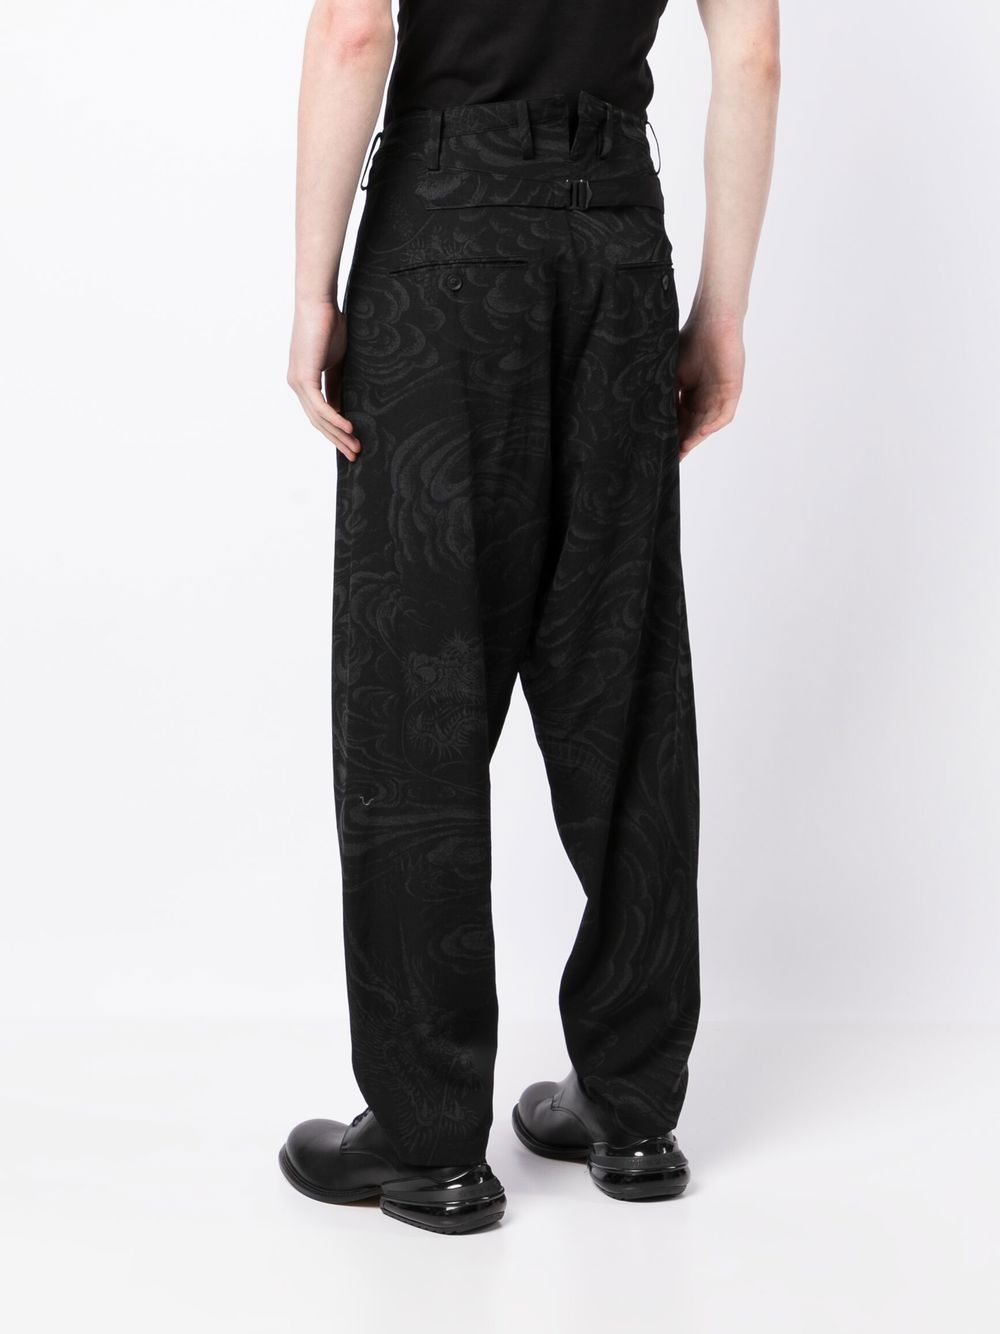 graphic-print slouchy trousers